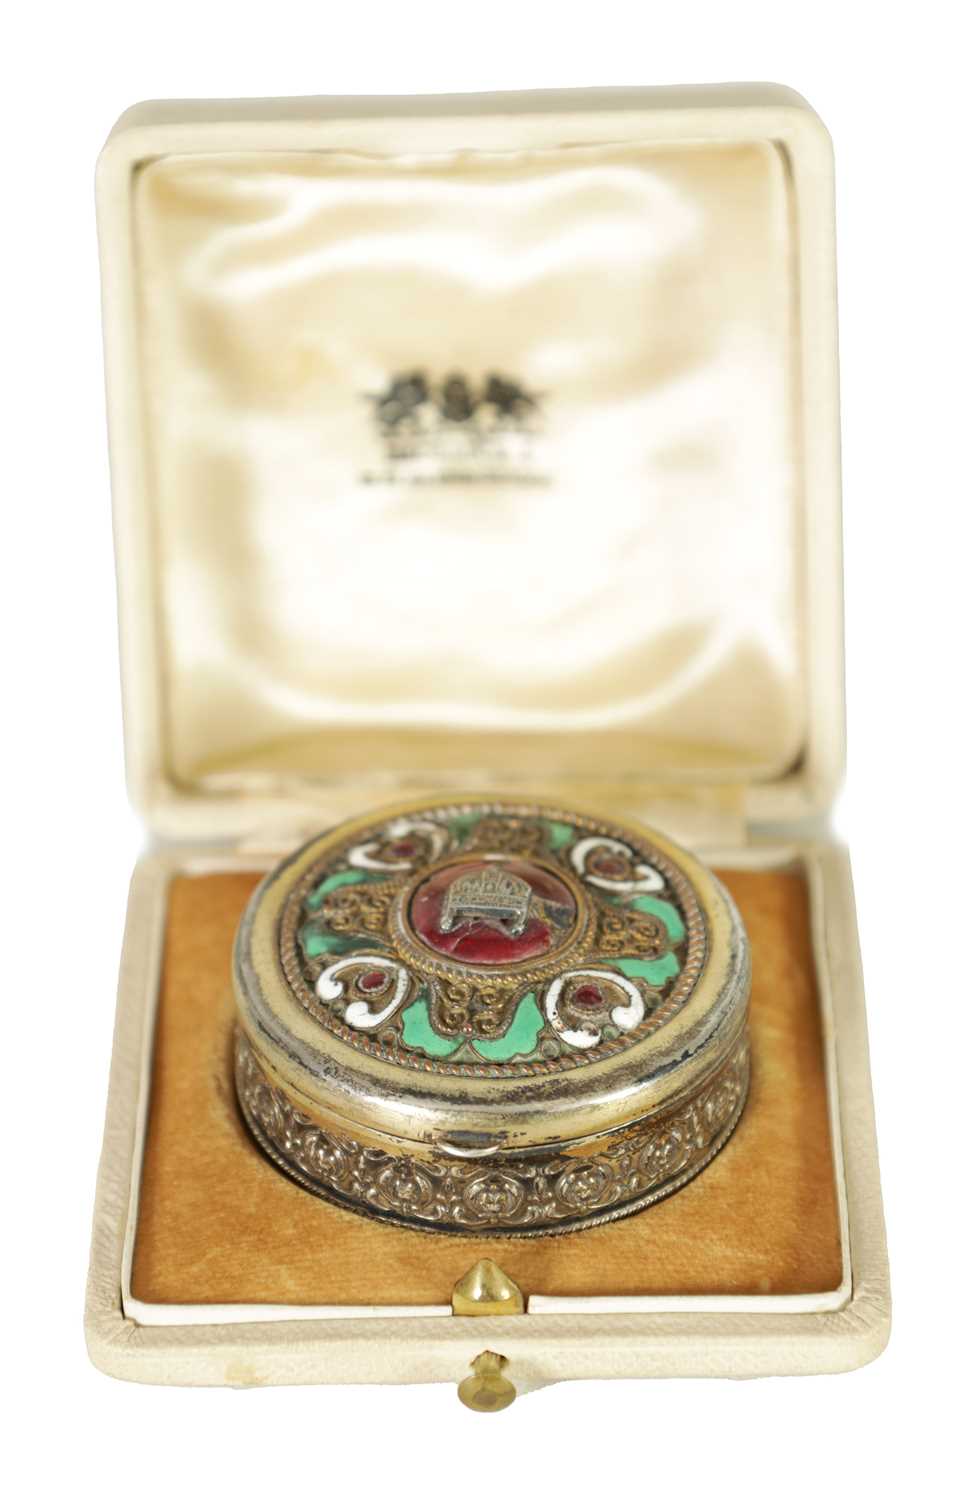 A LATE 19TH-CENTURY RUSSIAN HALLMARKED SILVER GILT AND ENAMEL PILL BOX